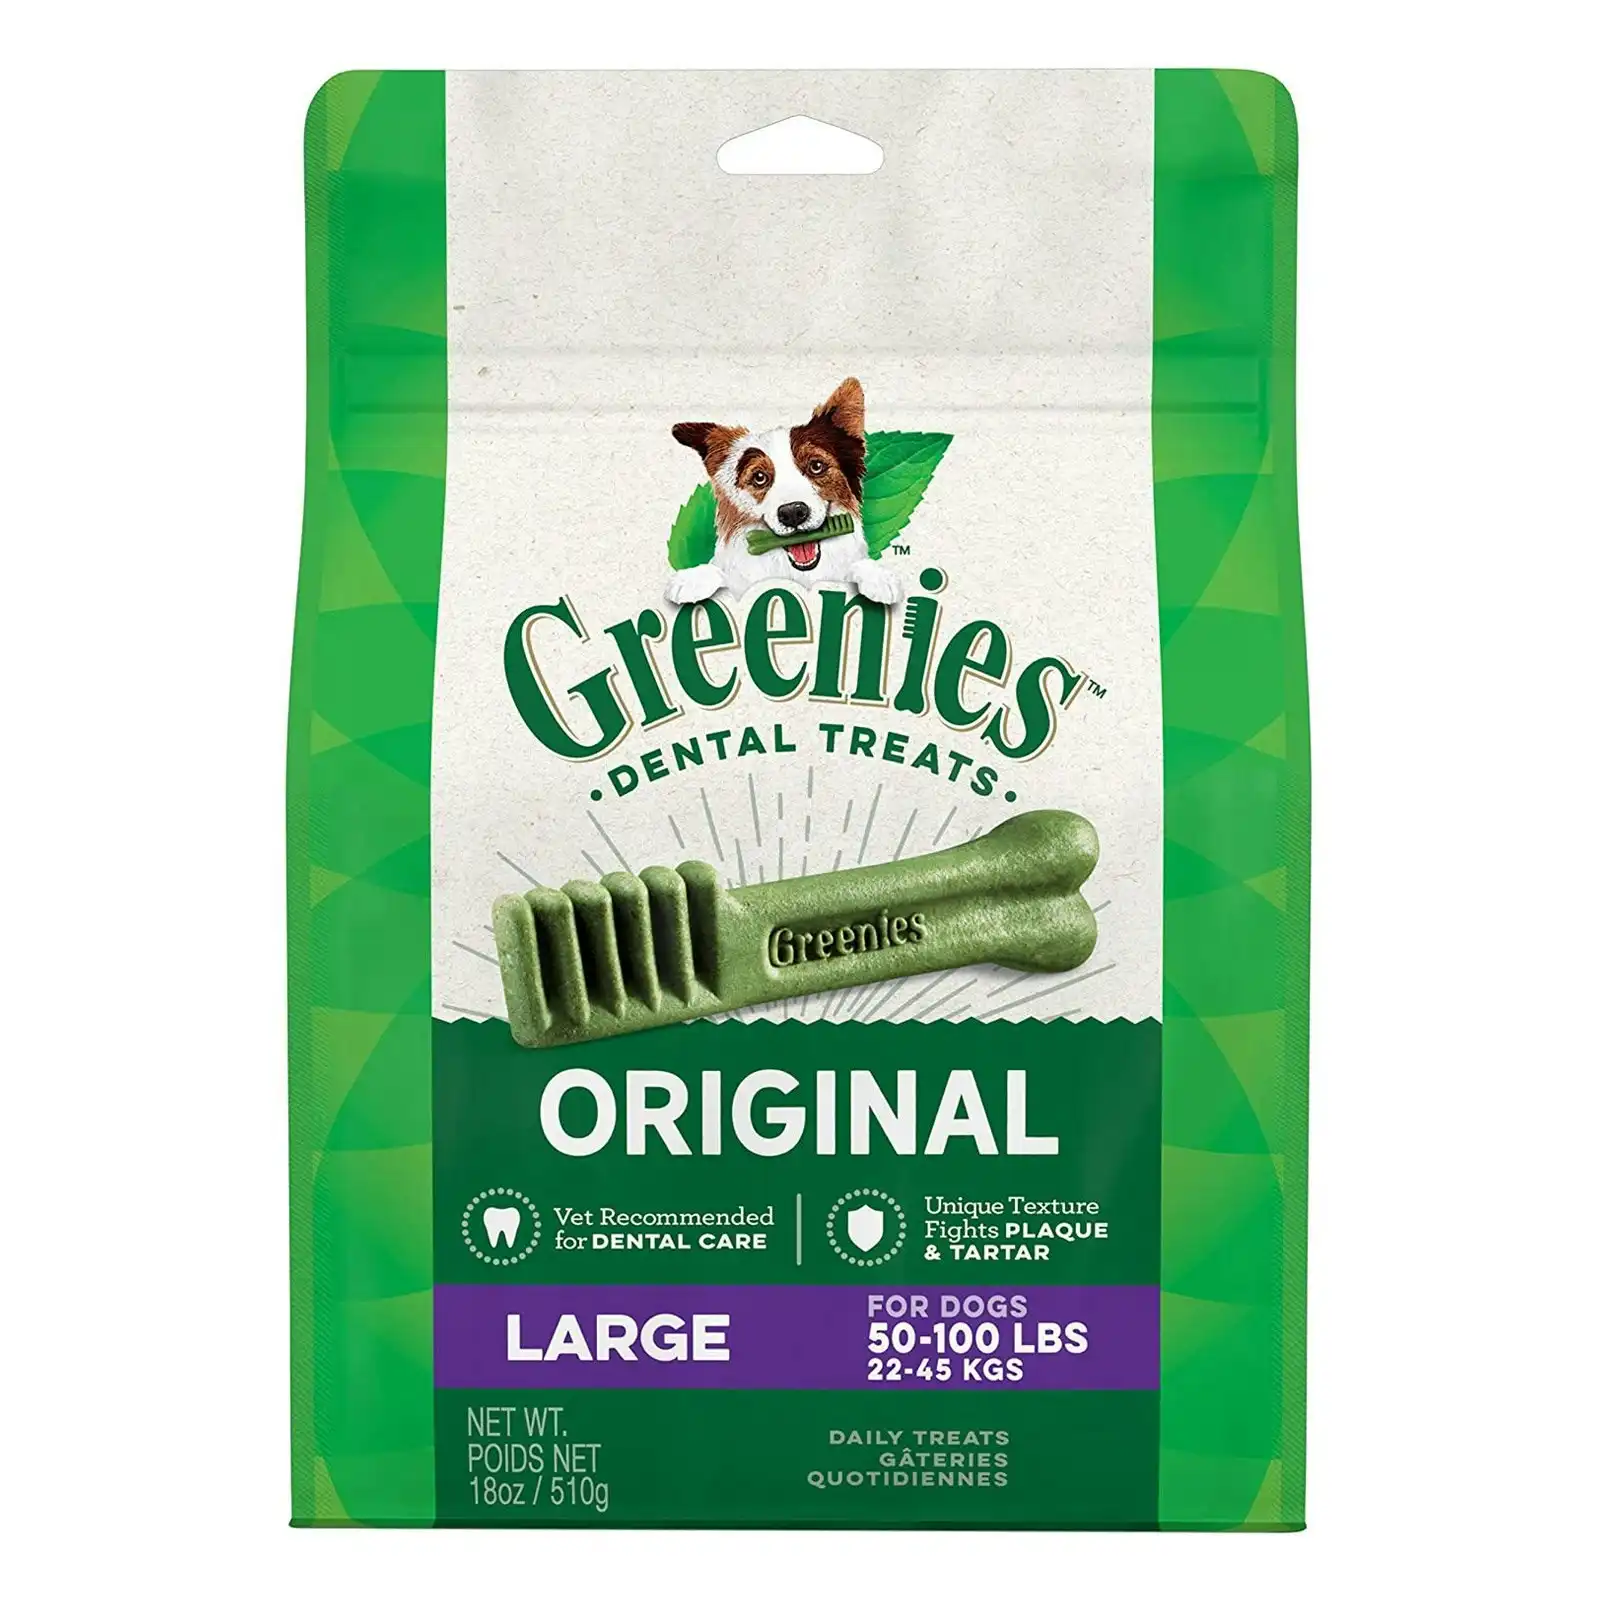 GREENIES Original Dental Treats Large for Dogs 22 to 45 Kg 1 Kgs